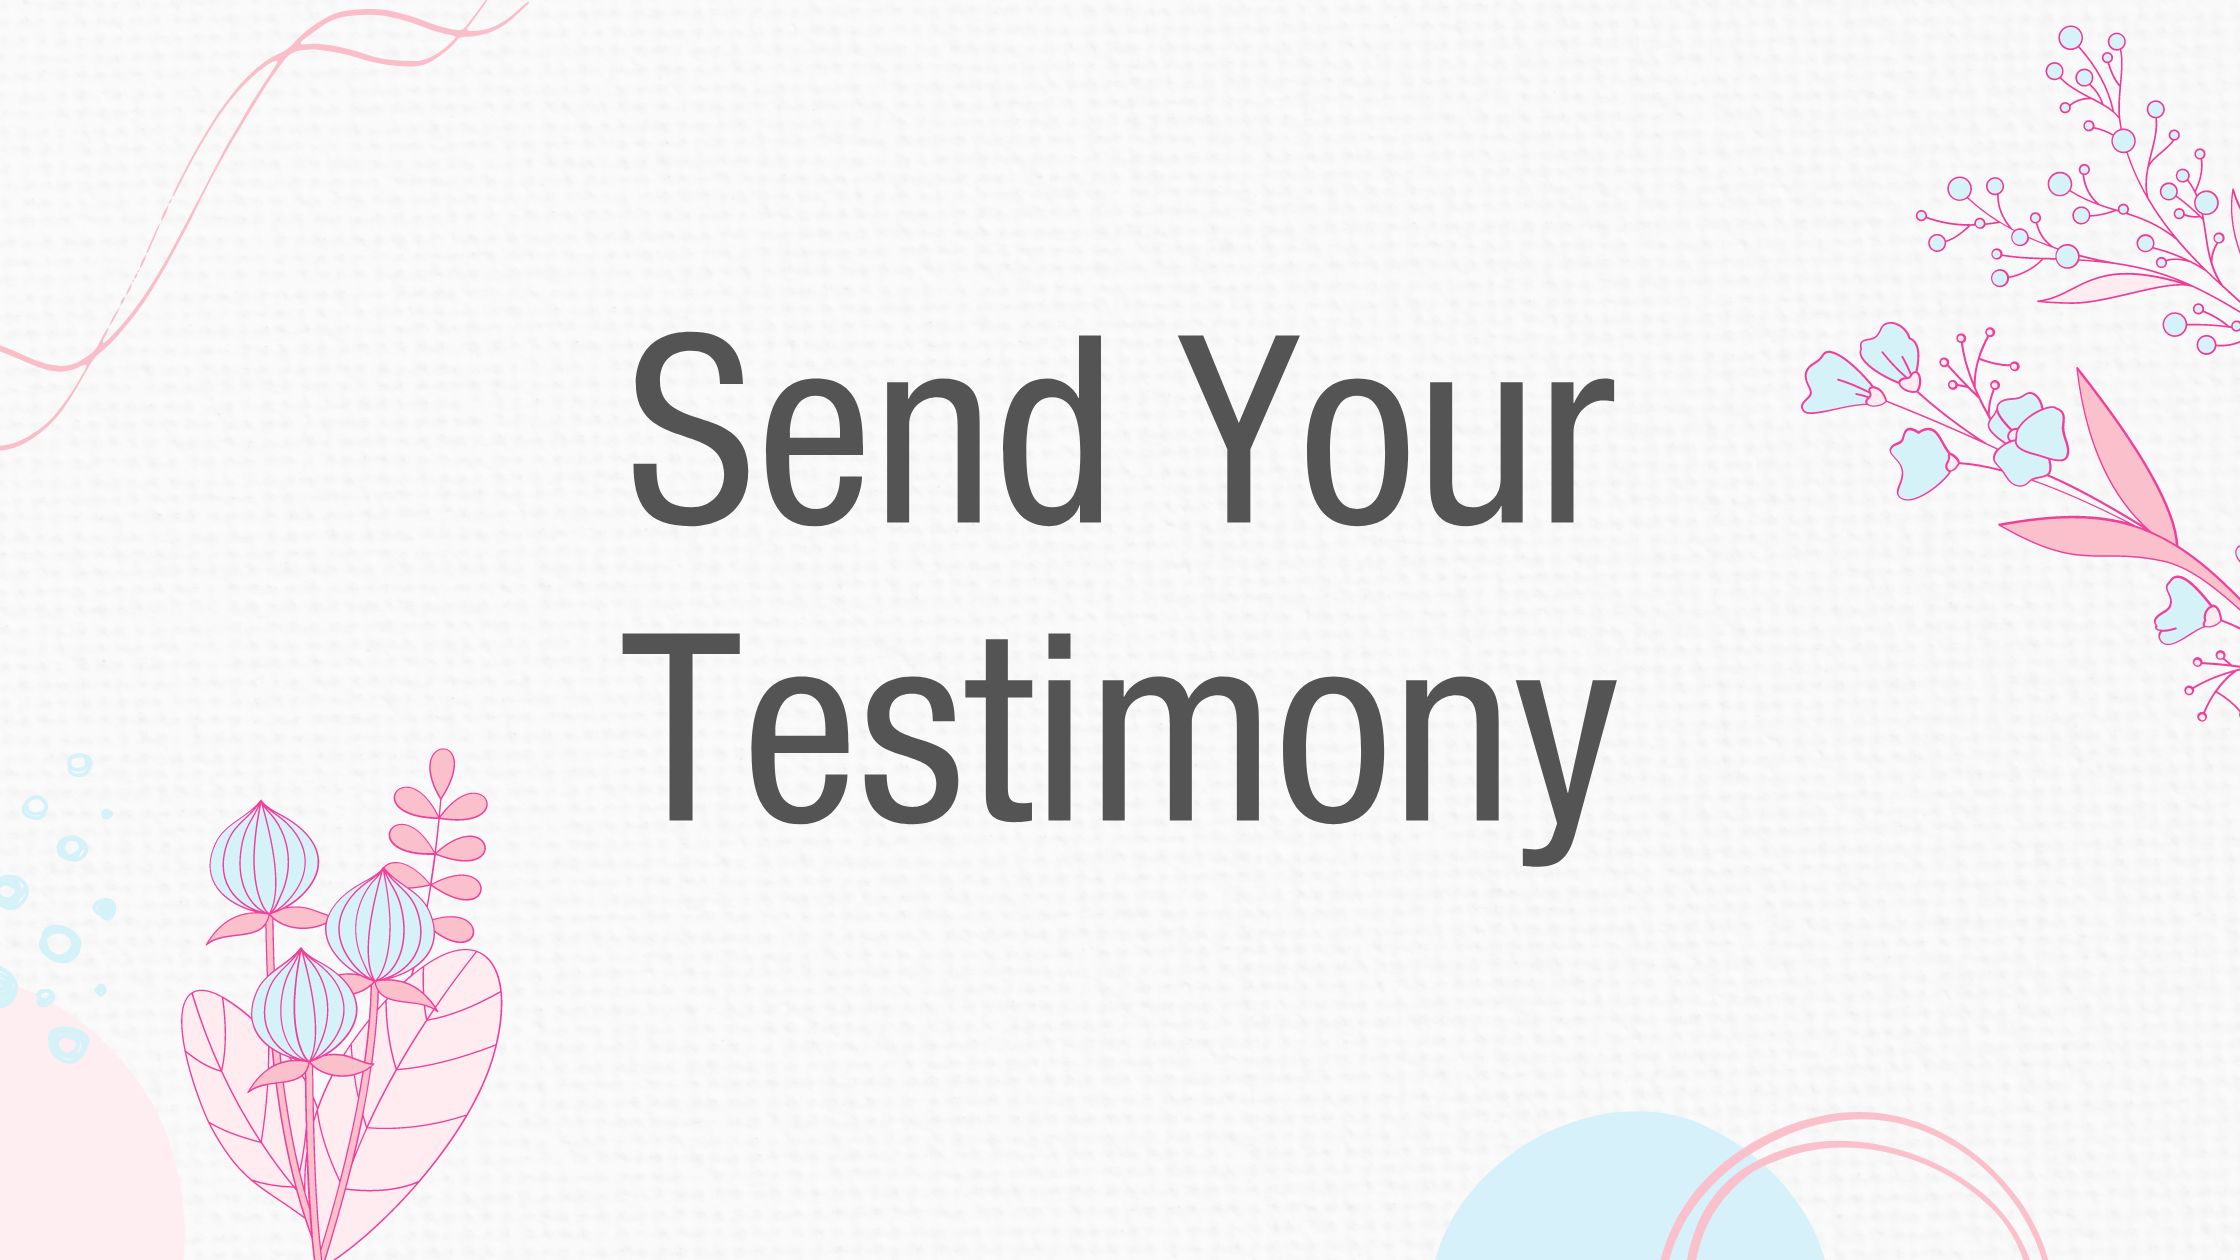 Send Your Testimony to KCM Europe